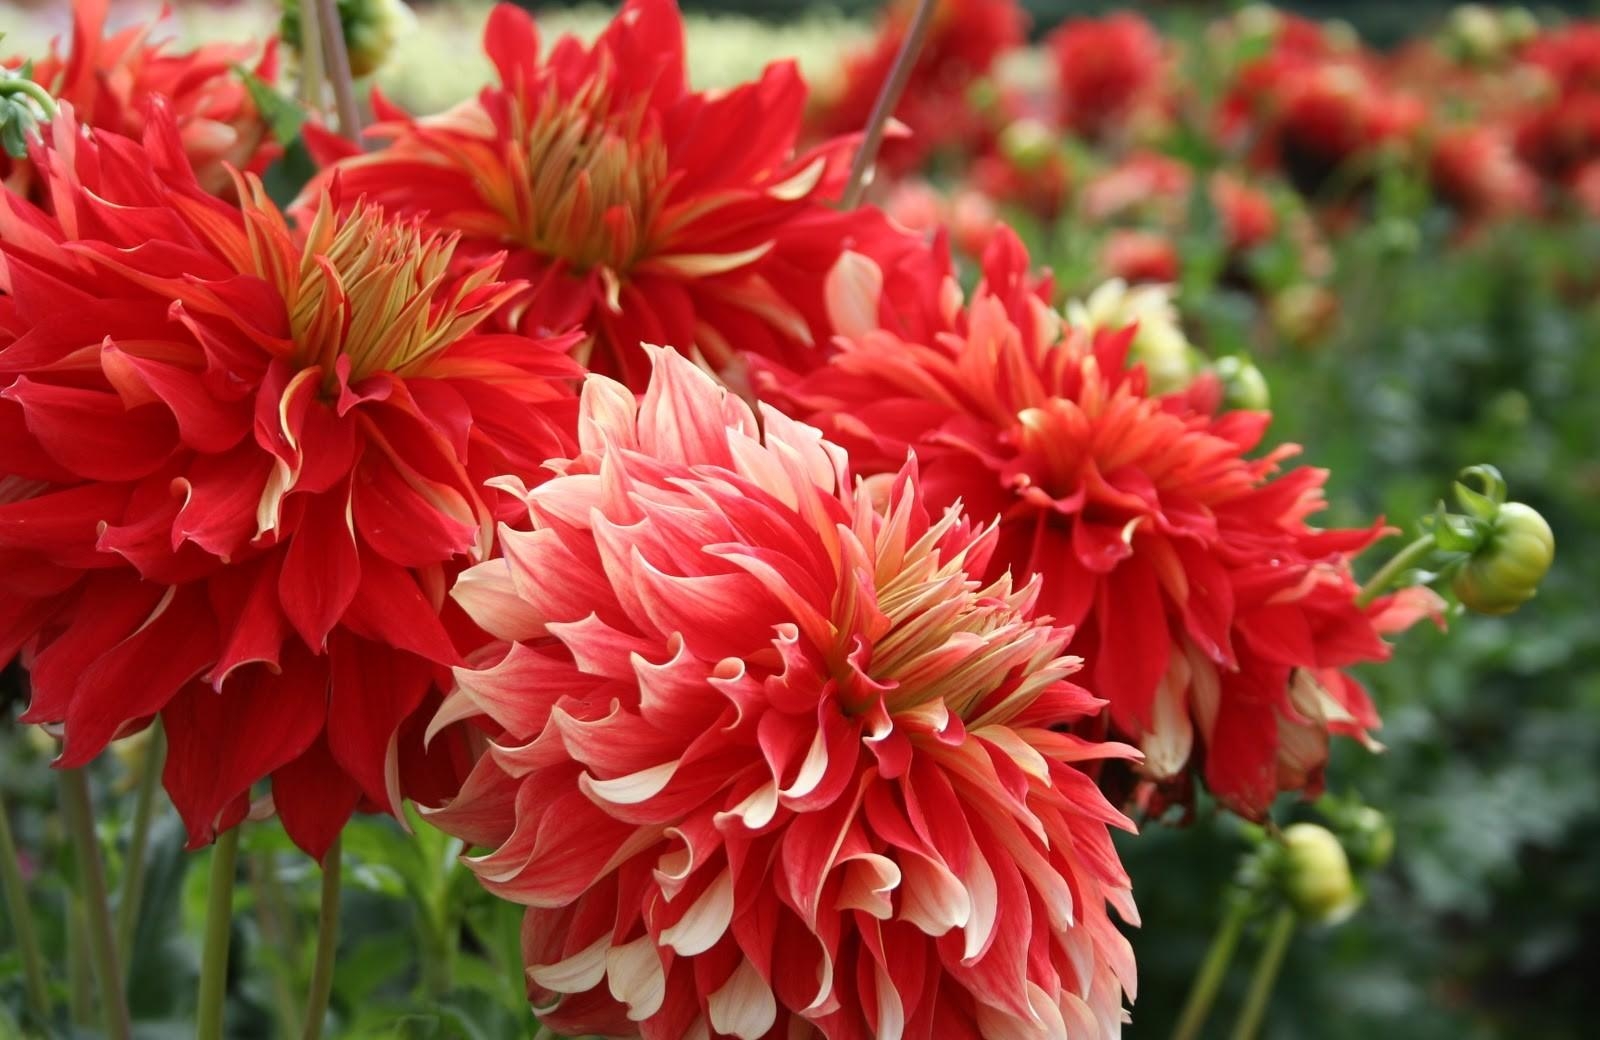 dahlias, flowers, red, flower bed, flowerbed, disbanded, loose images